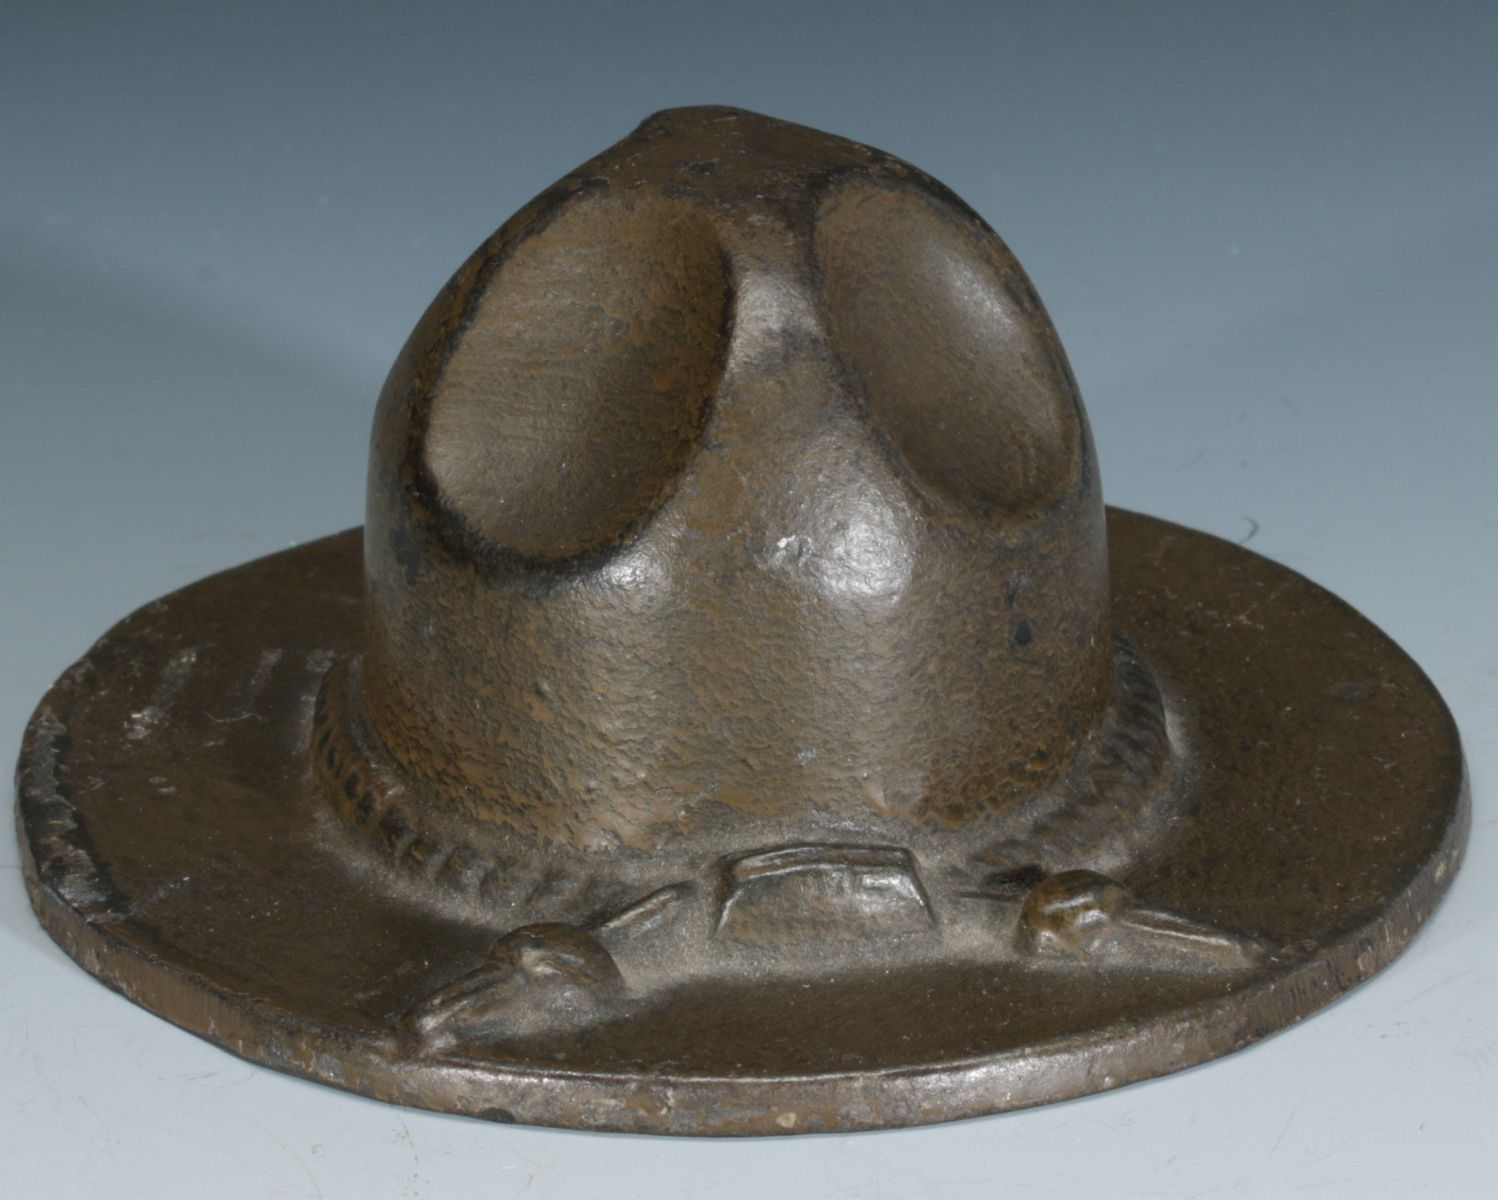 AN IRON WWI DOUGHBOY HAT ADVERTISING CHANNON EMERY STOVE